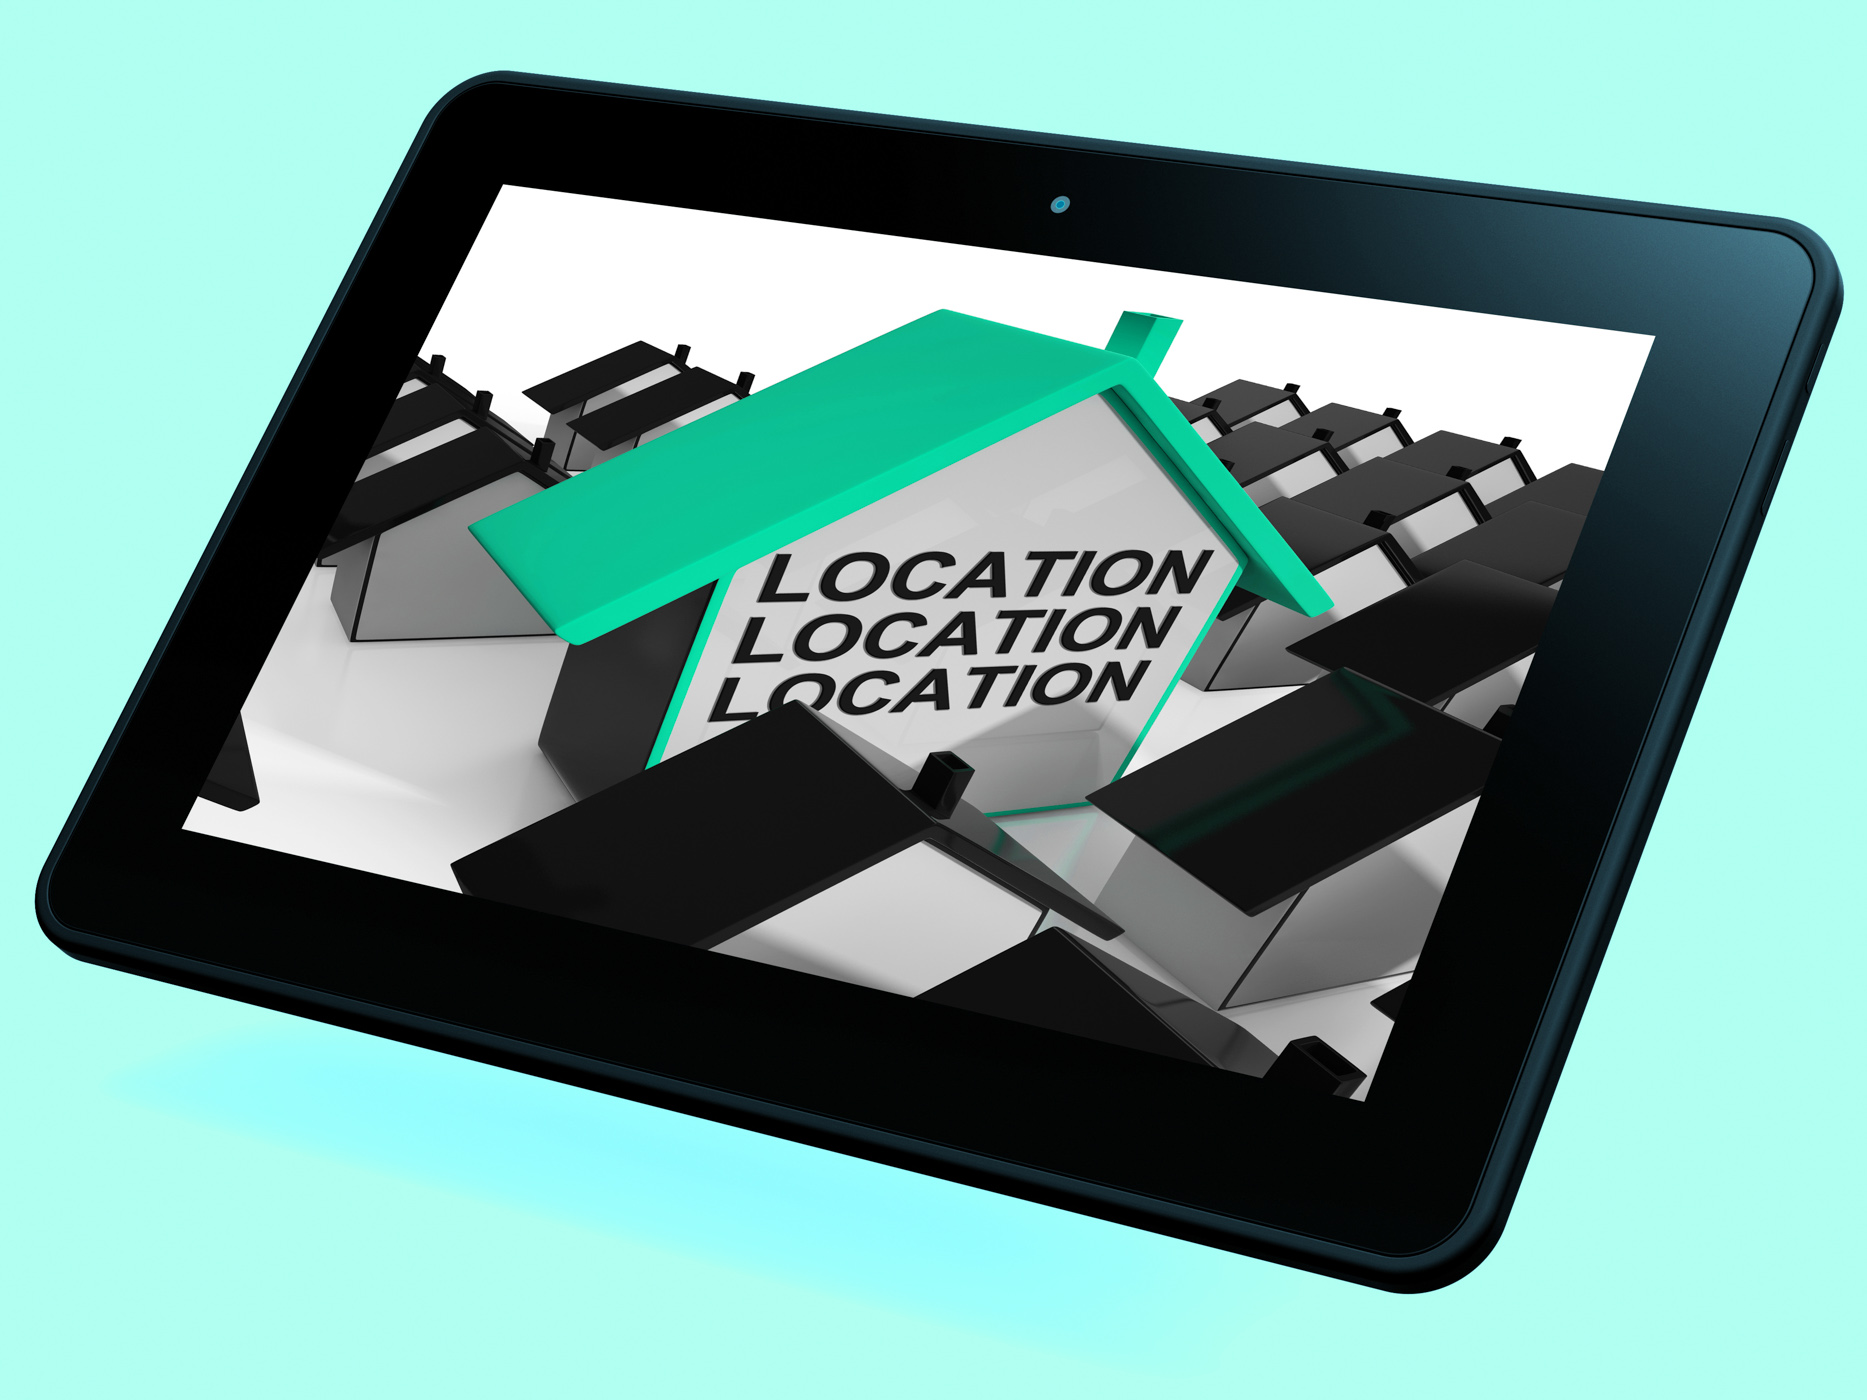 Location location location house tablet means situated perfectly photo